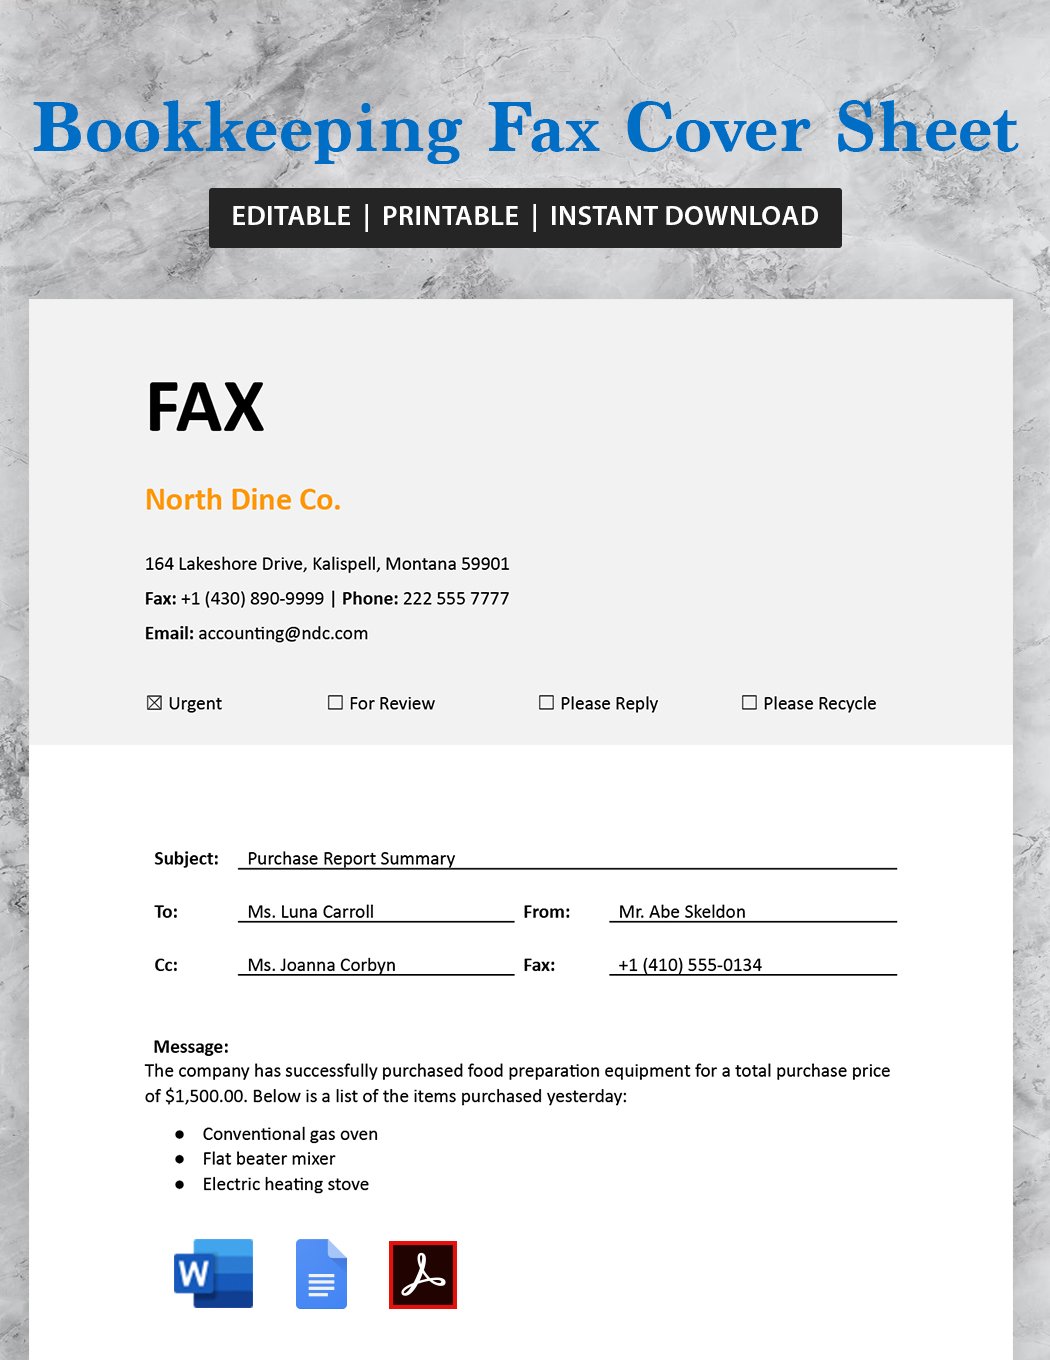 Bookkeeping Fax Cover Sheet Template